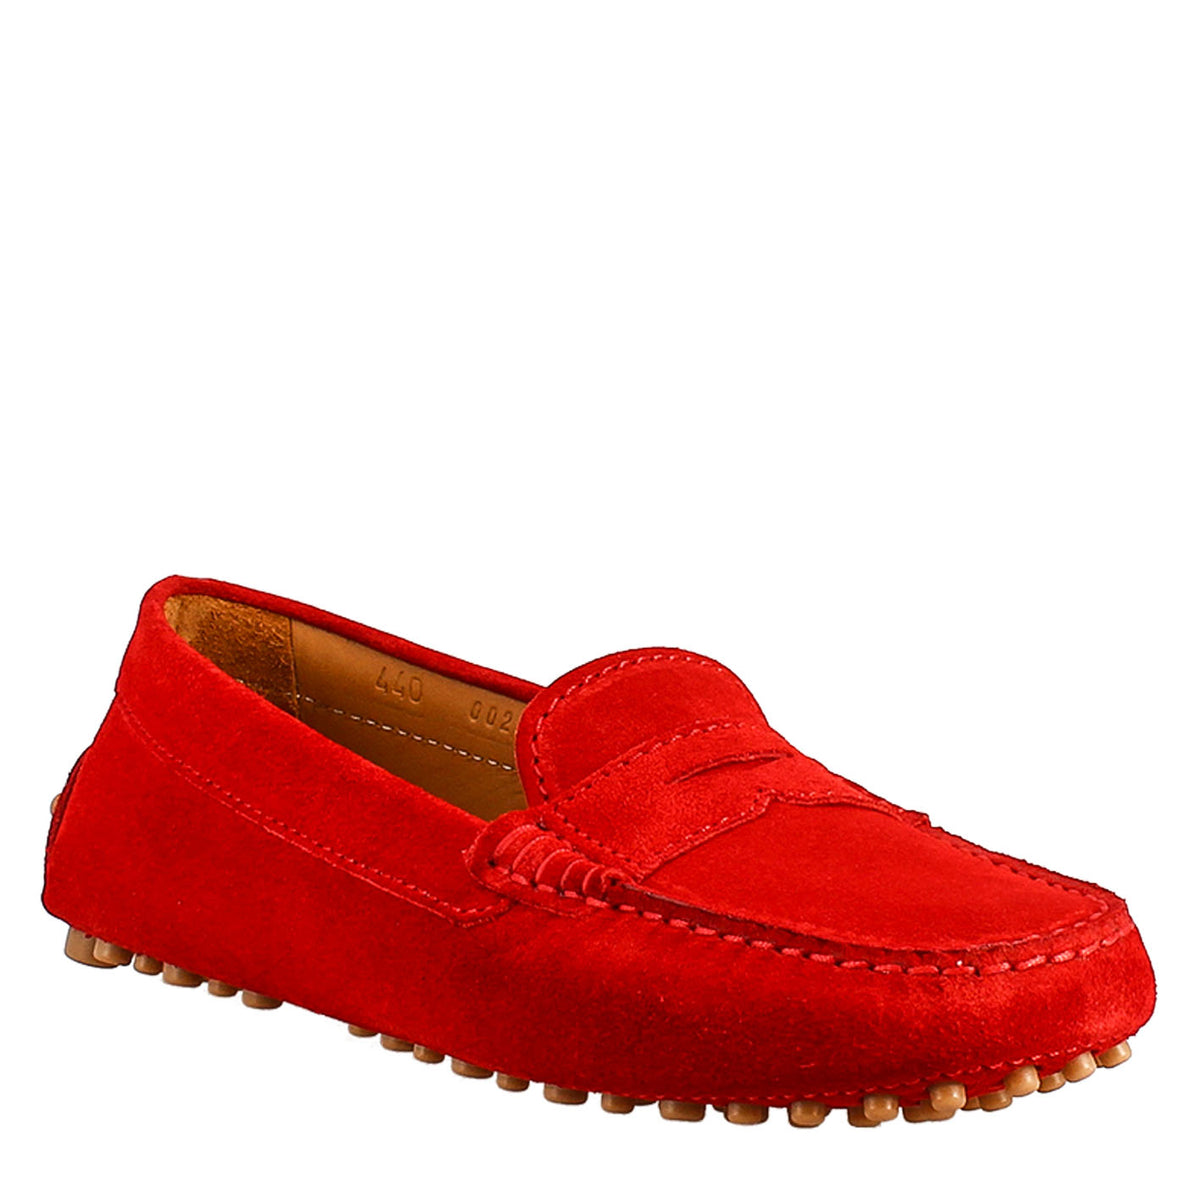 Tubular woman's moccasin in red suede